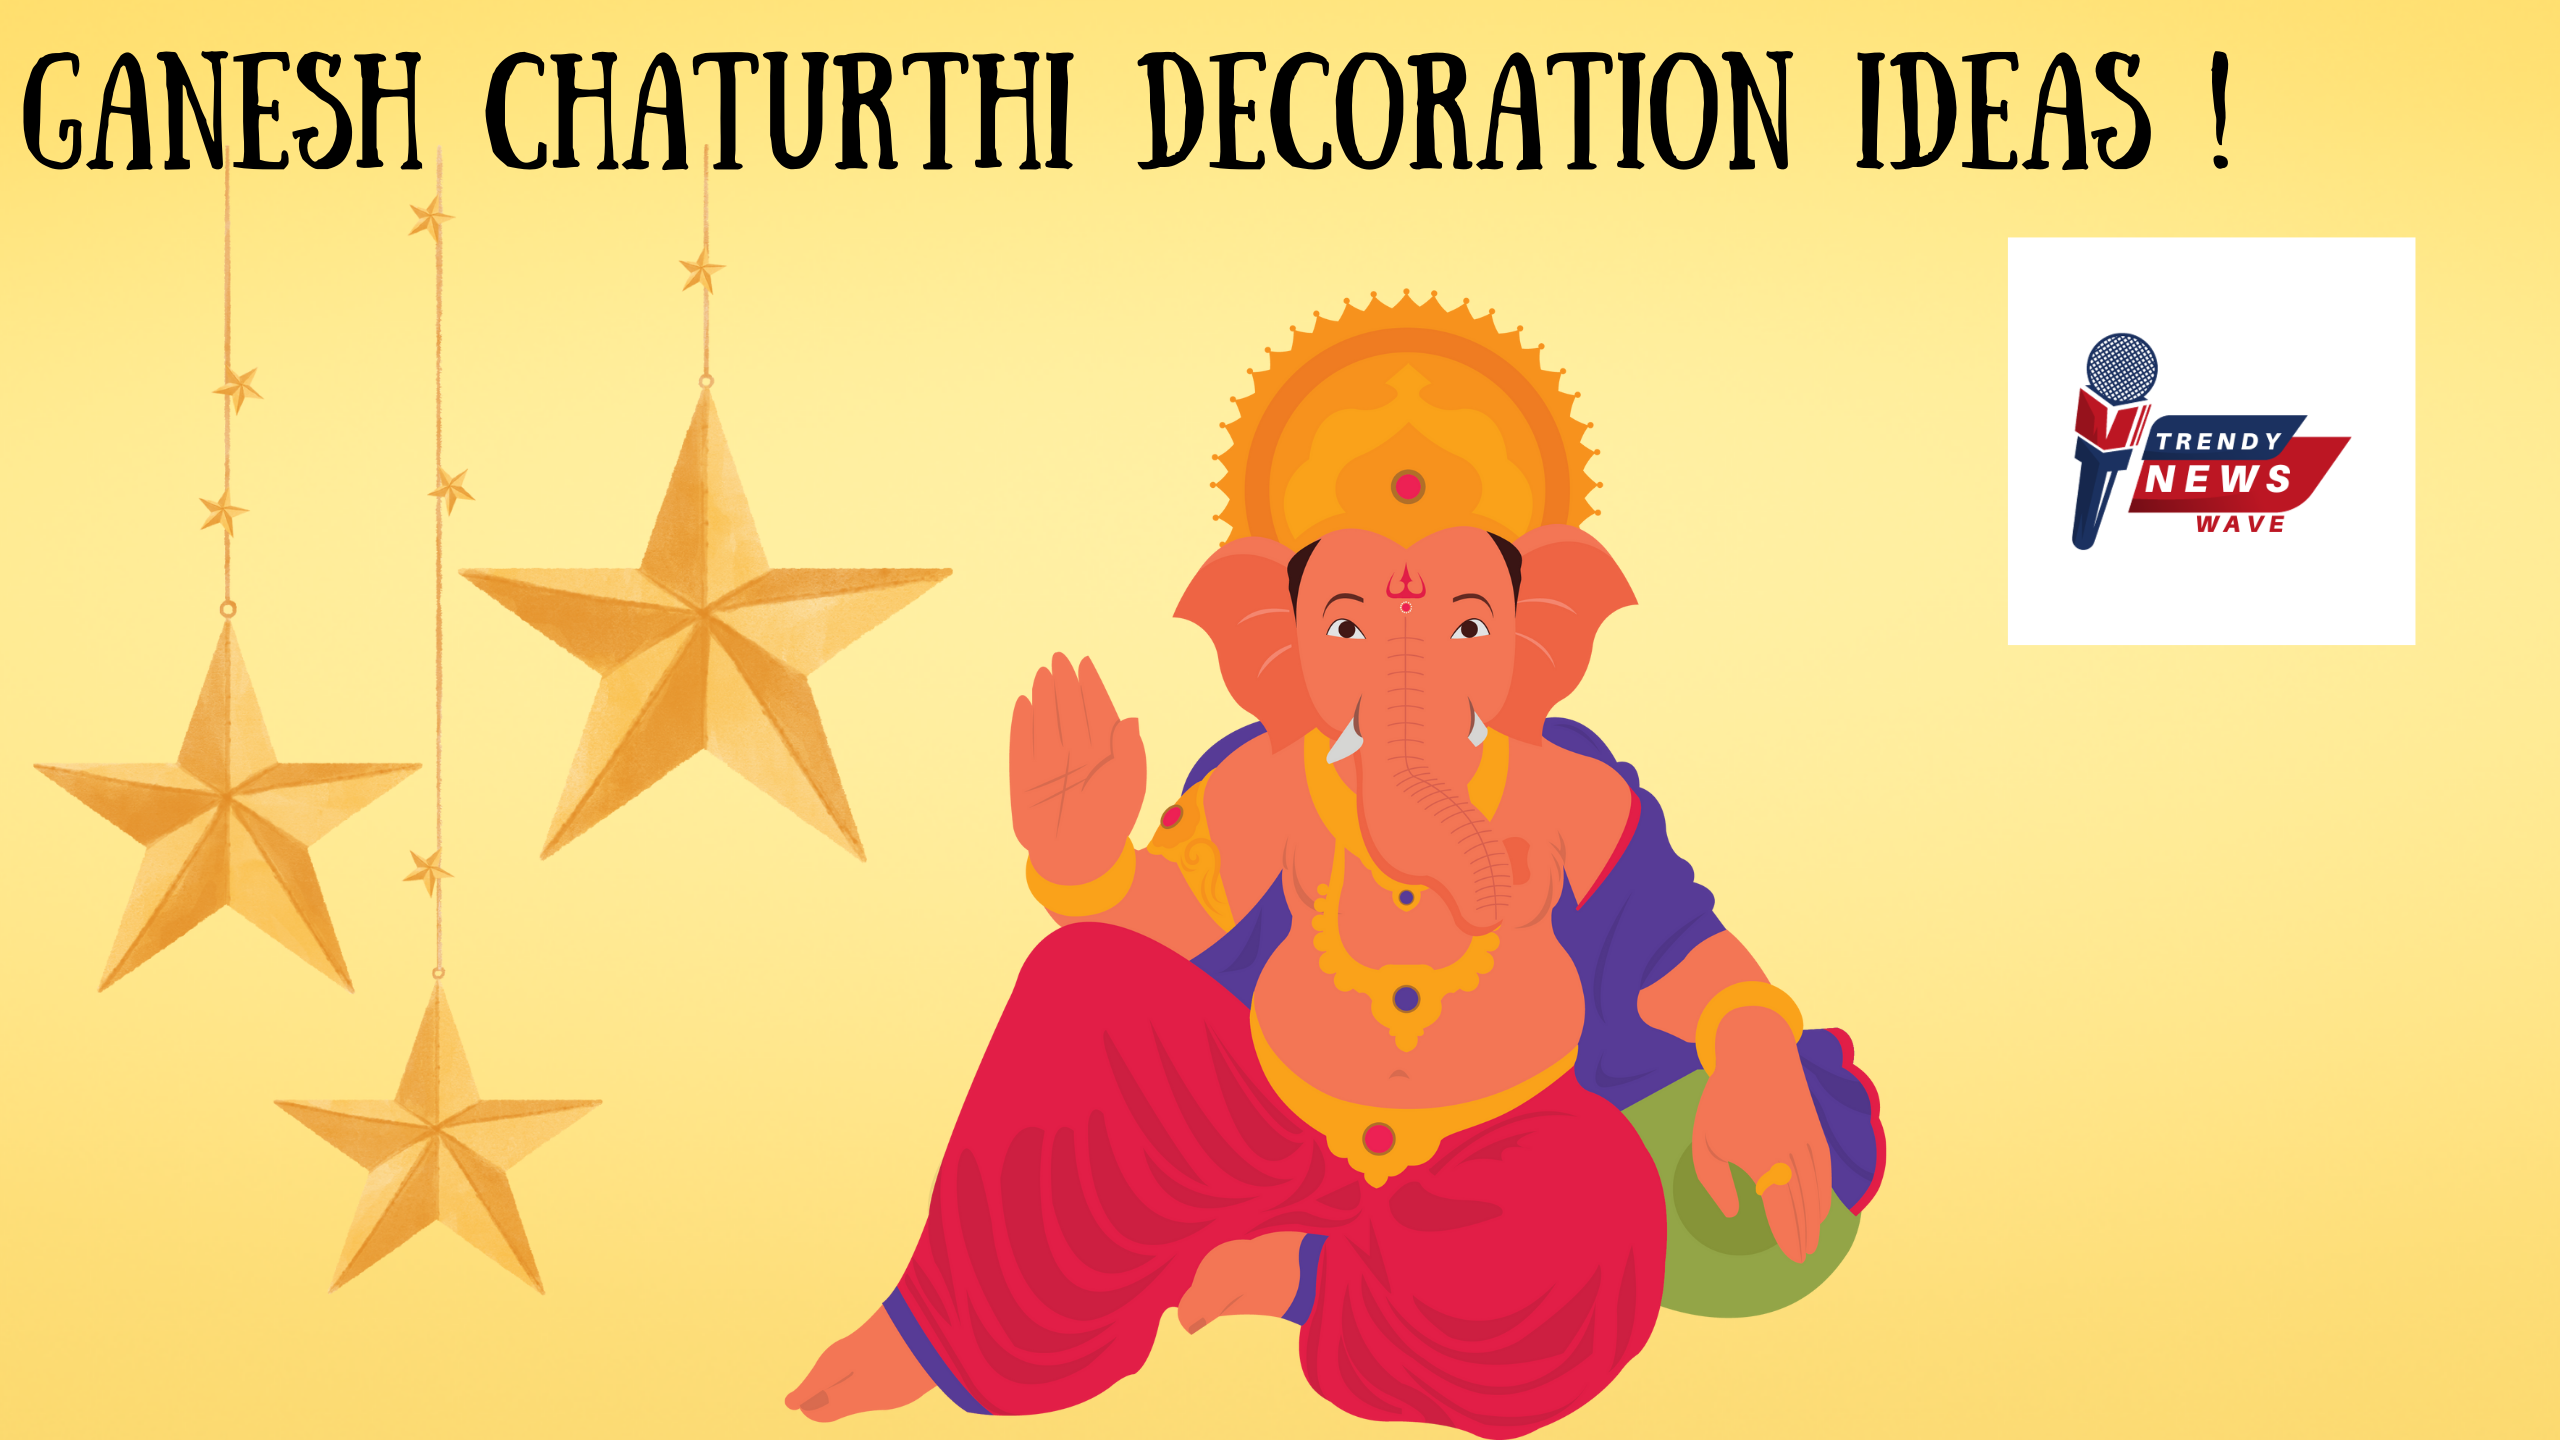 Ganesh Chaturthi Decoration Ideas for a Divine Celebration! 🌟 Boost the Festive Vibes with Our Top Picks!"